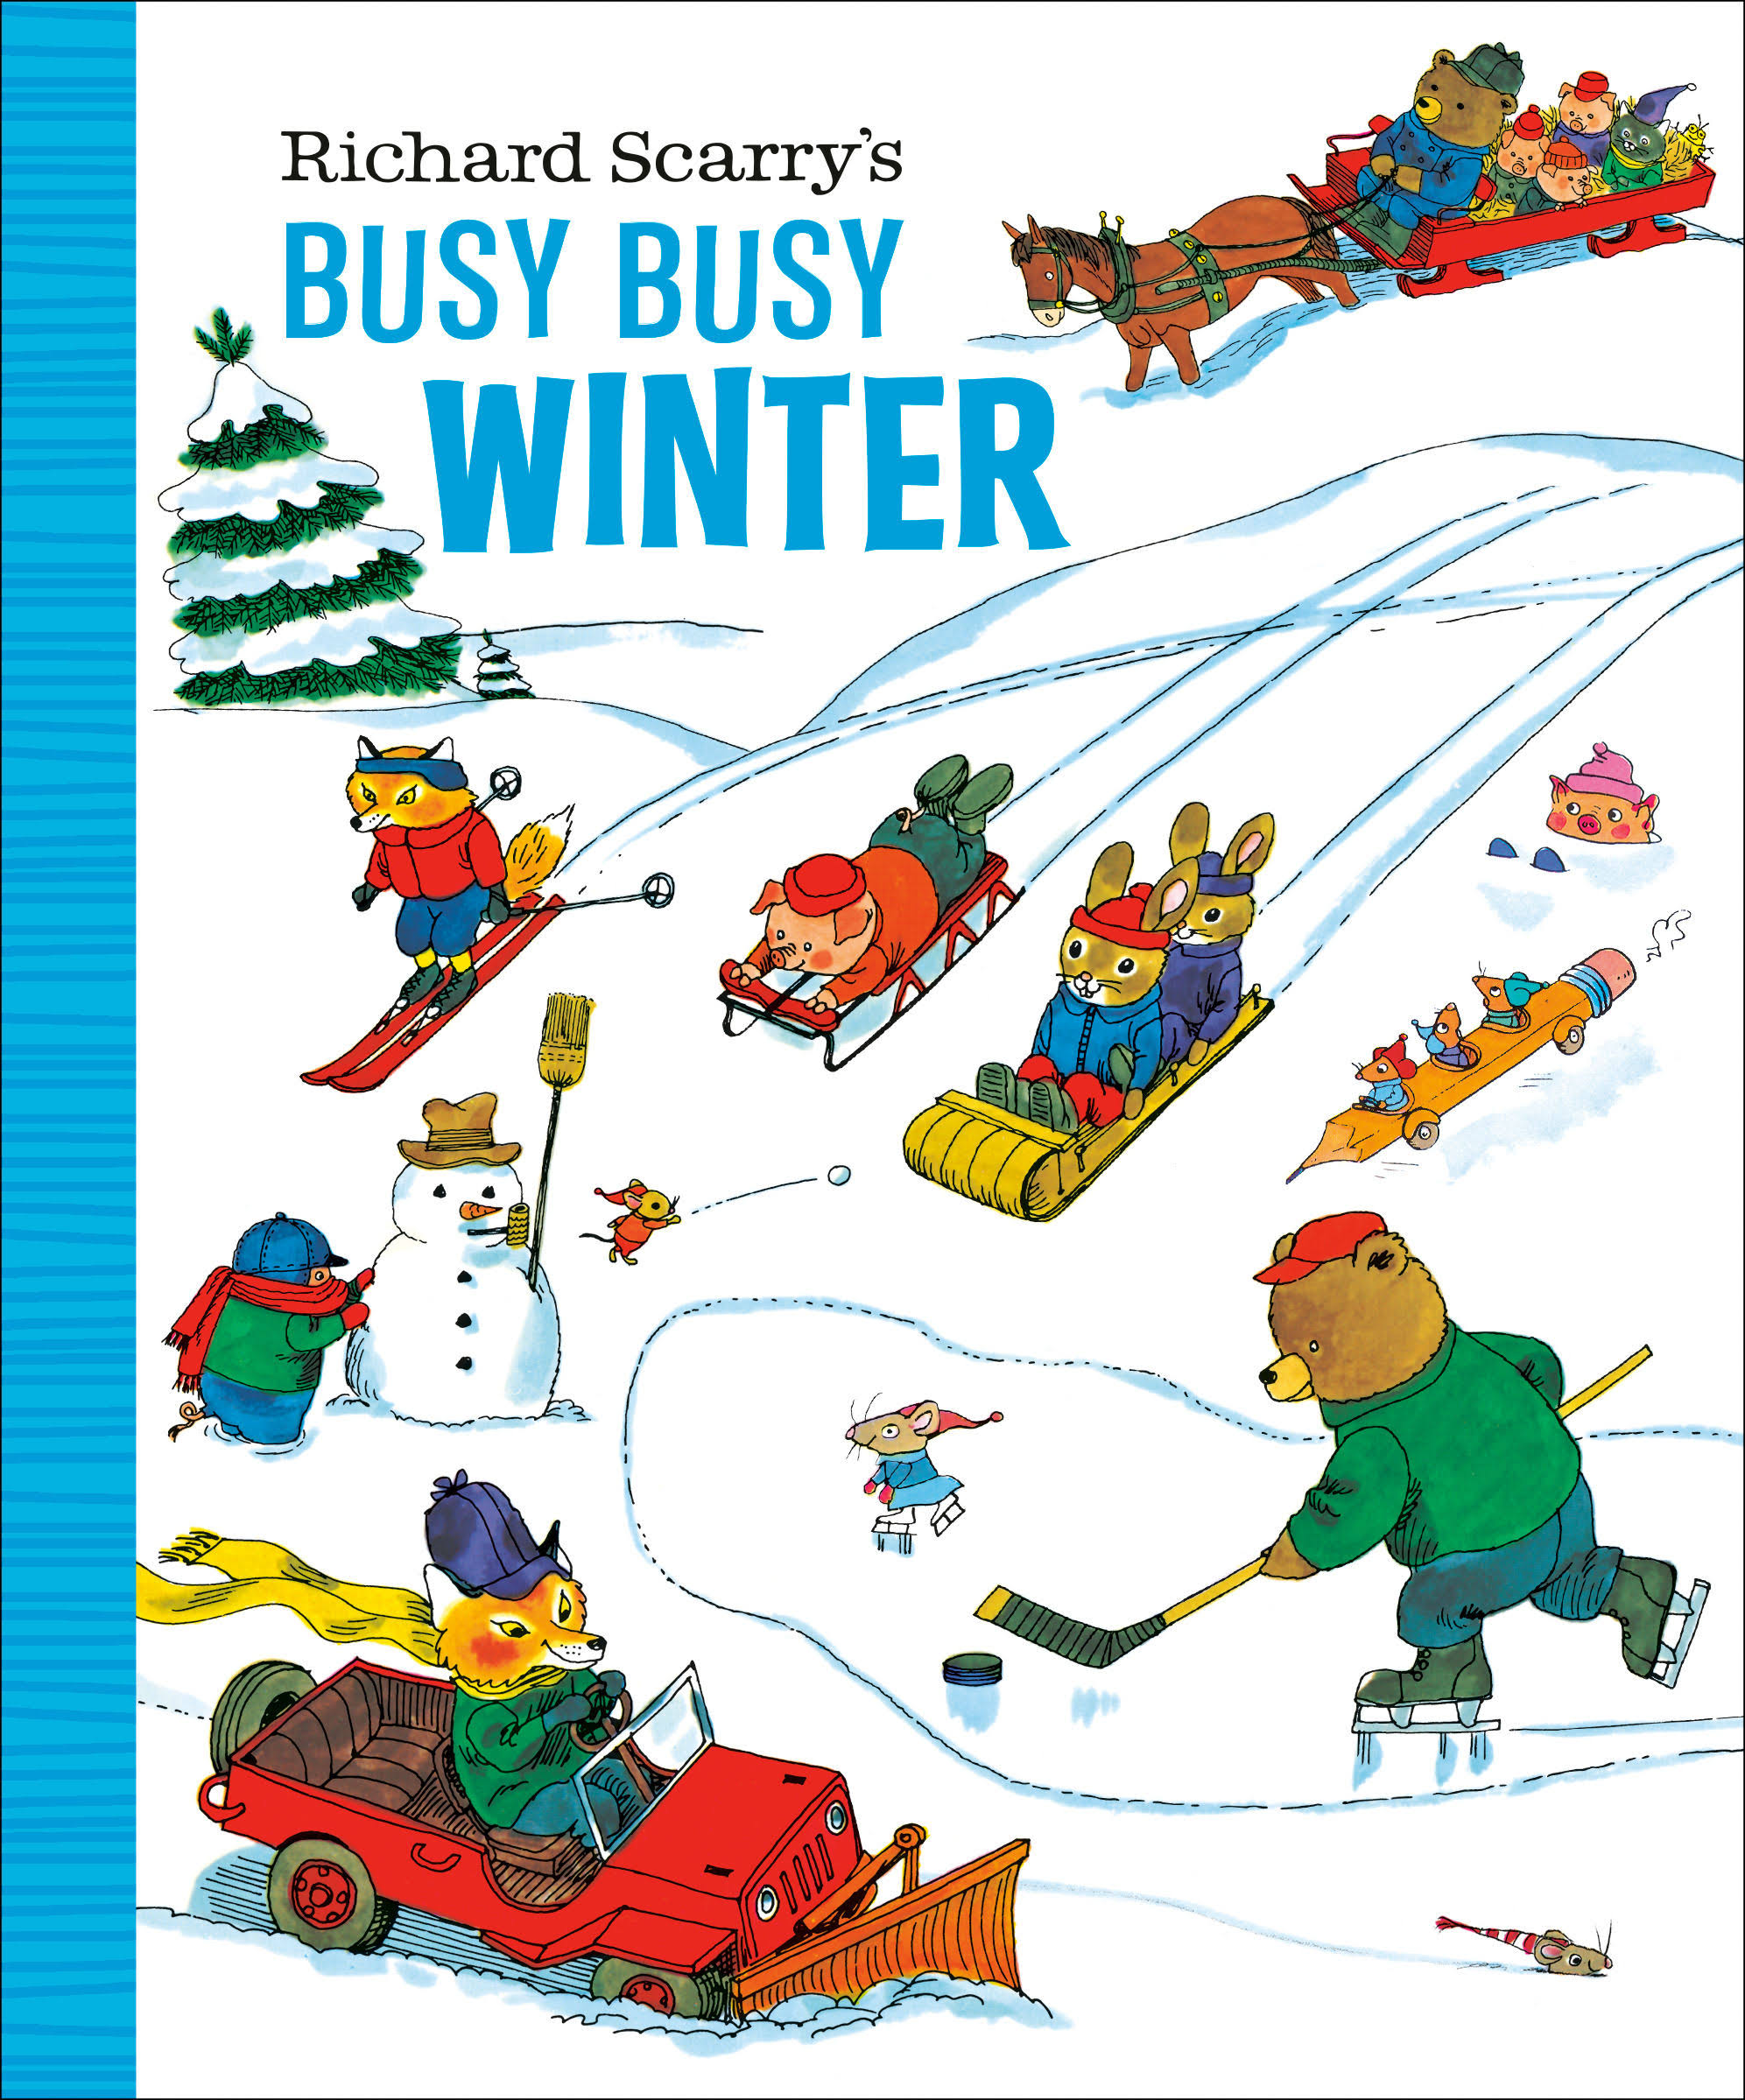 Richard Scarry's Busy Busy Winter [Book]